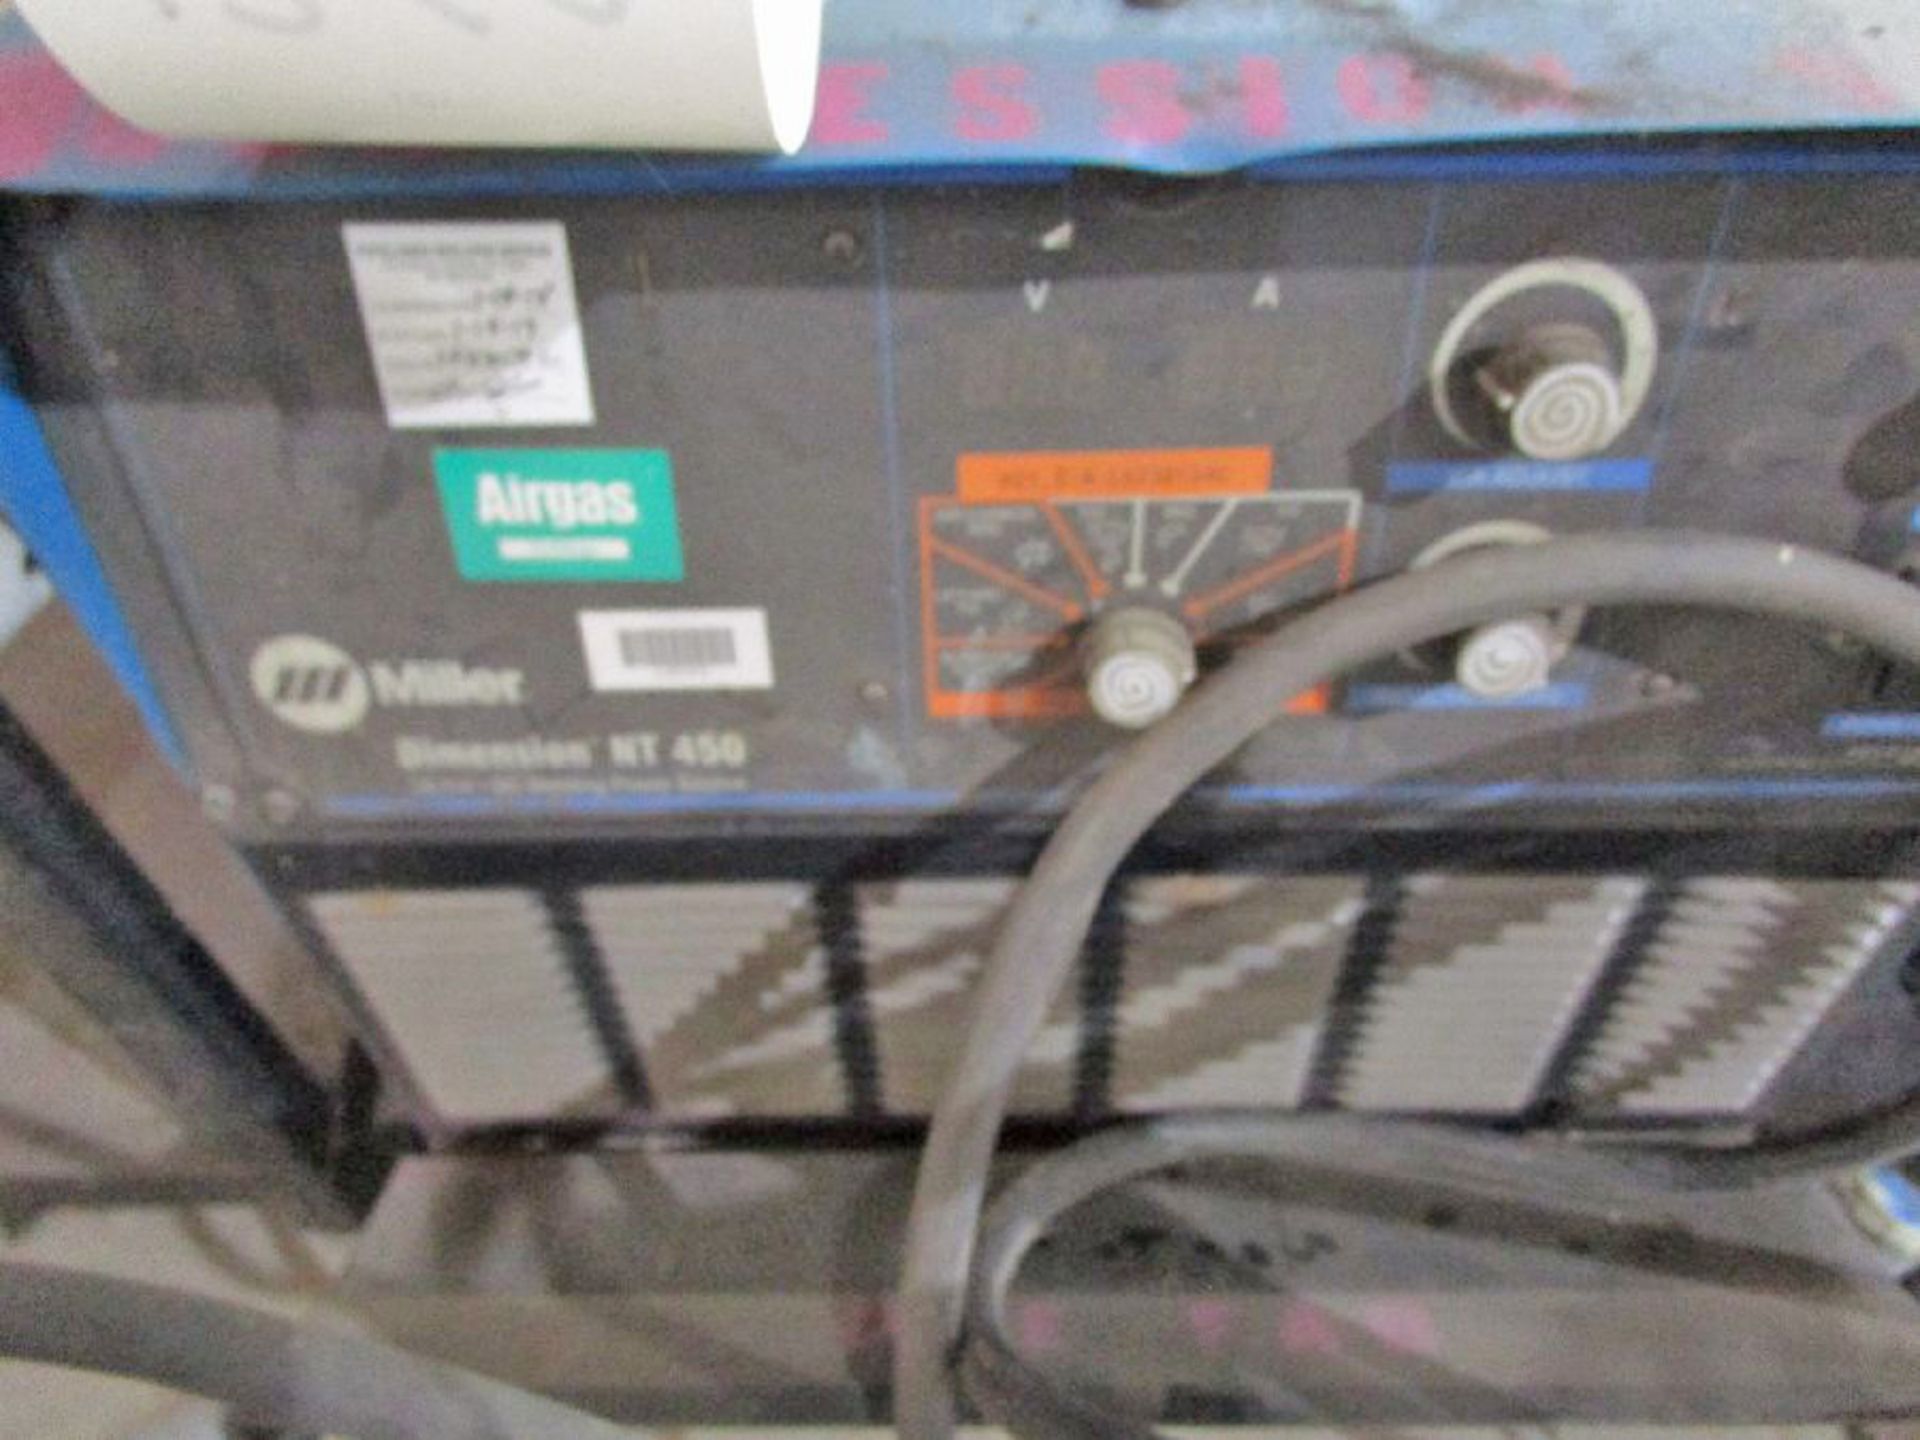 Miller Model Dimention NT 450 Welding Power Source - Image 3 of 6